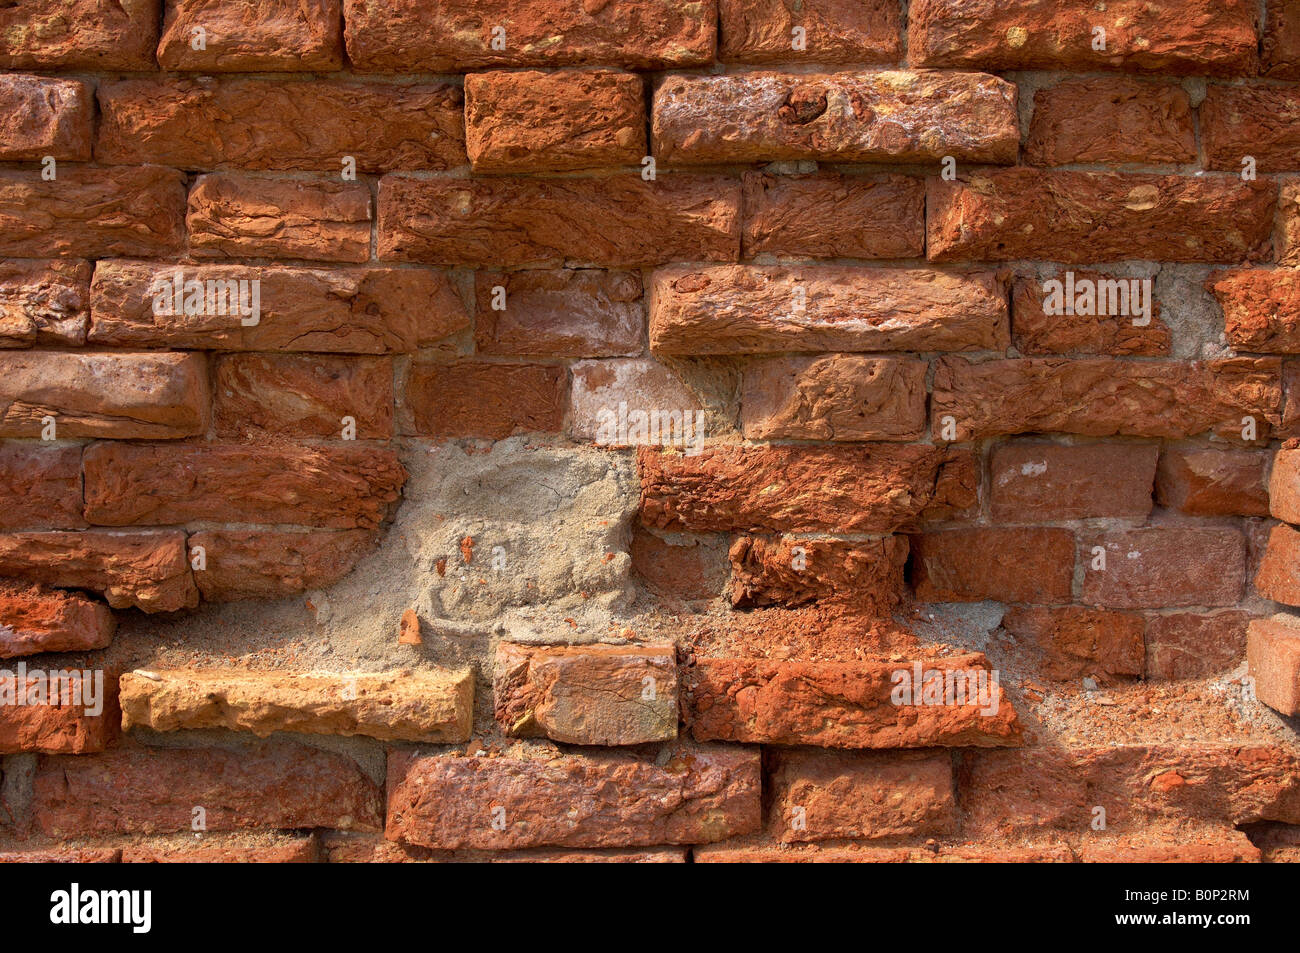 Venetian Old brick wall with falling red mortar Stock Photo